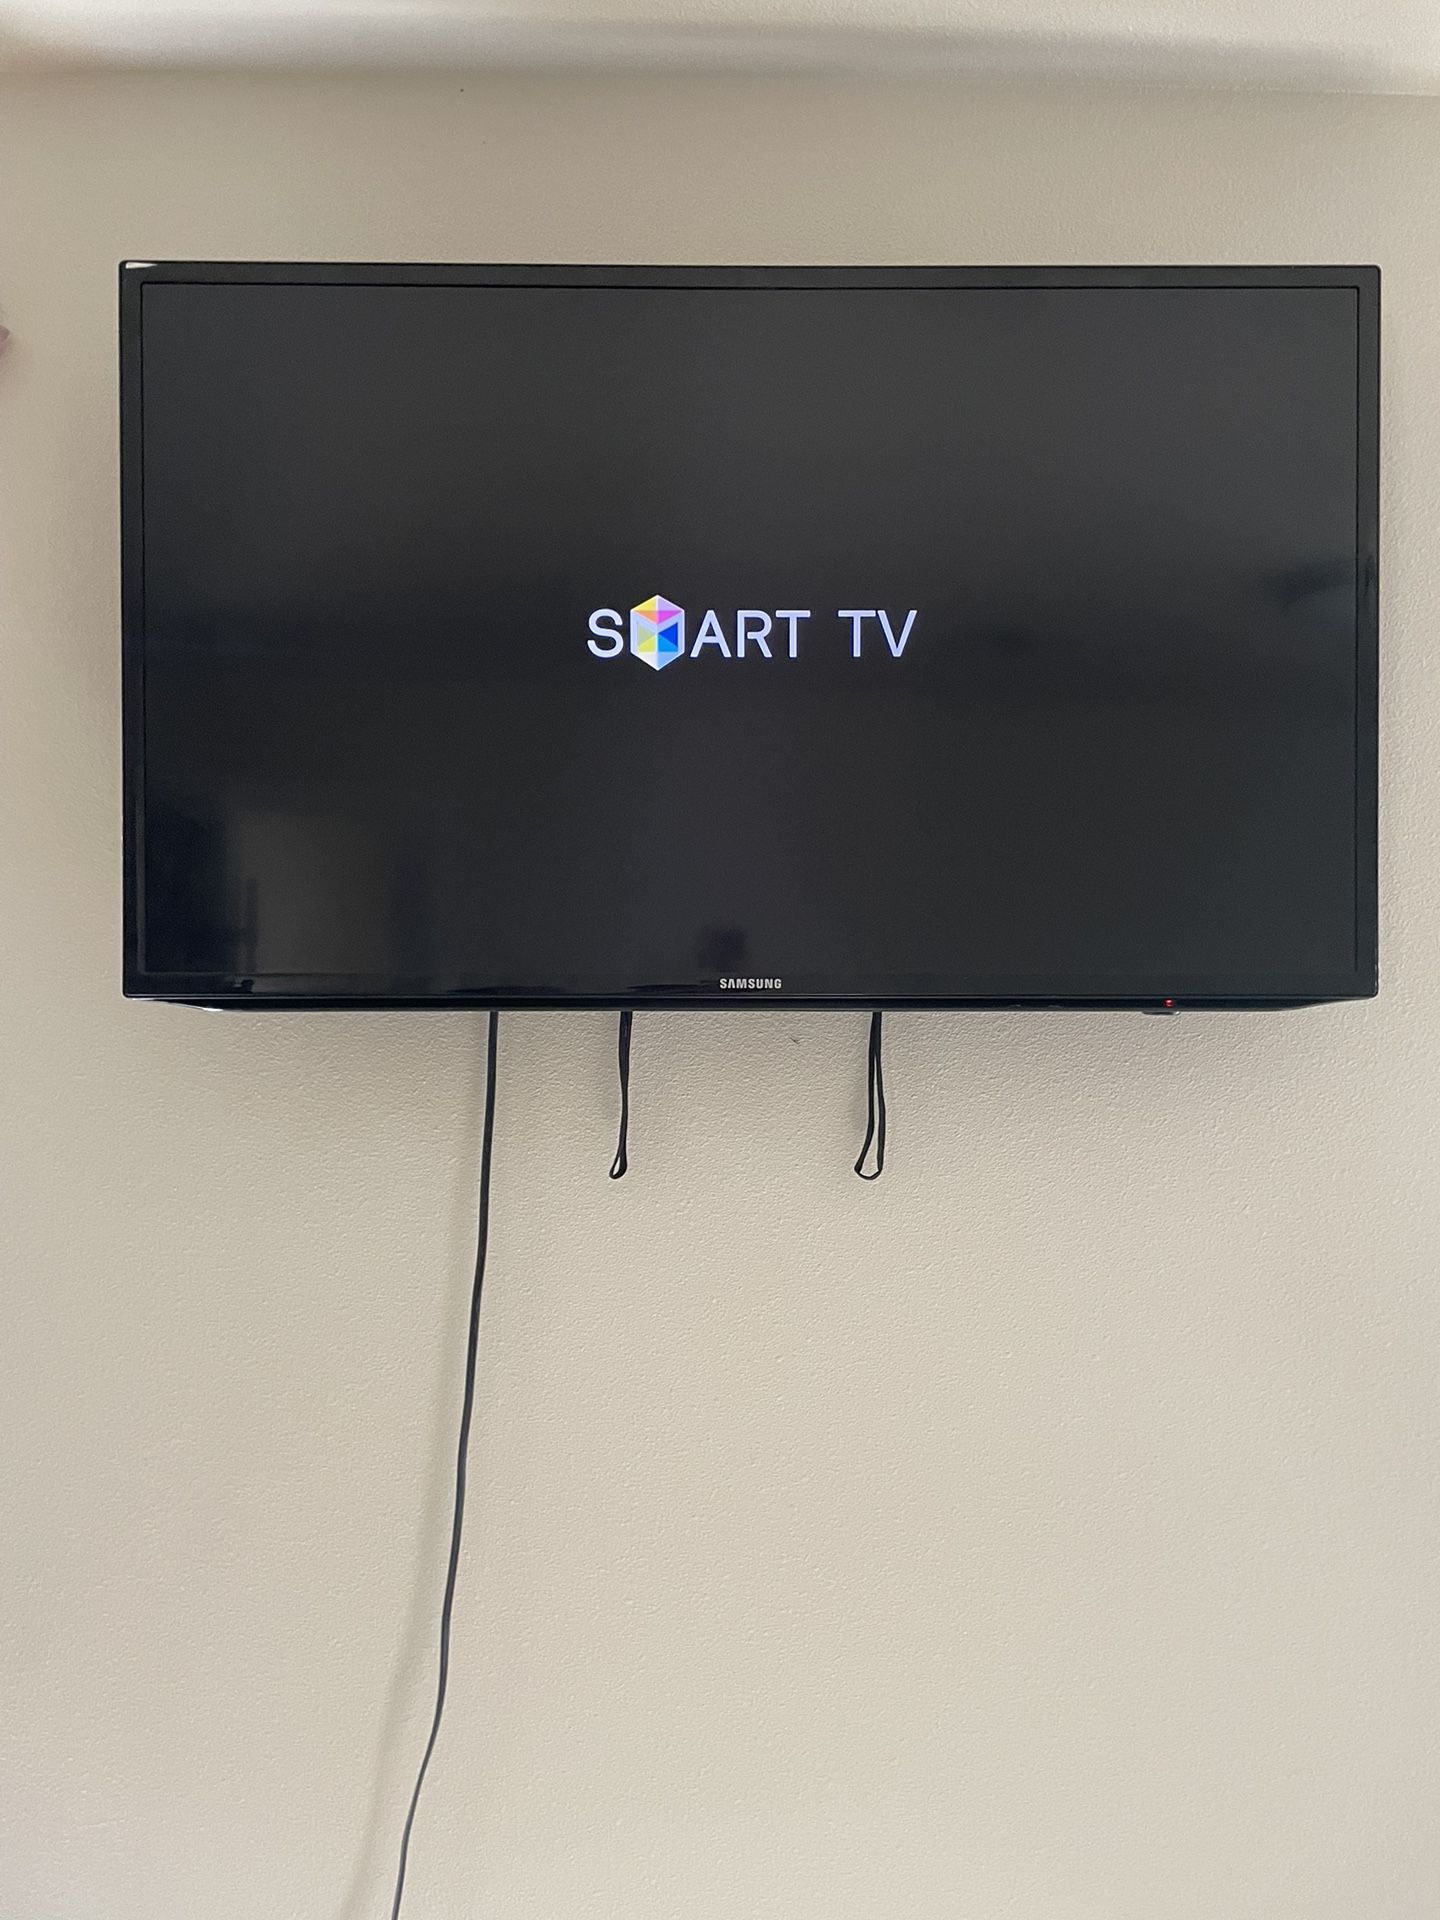 Samsung Smart Tv 36 Inches 